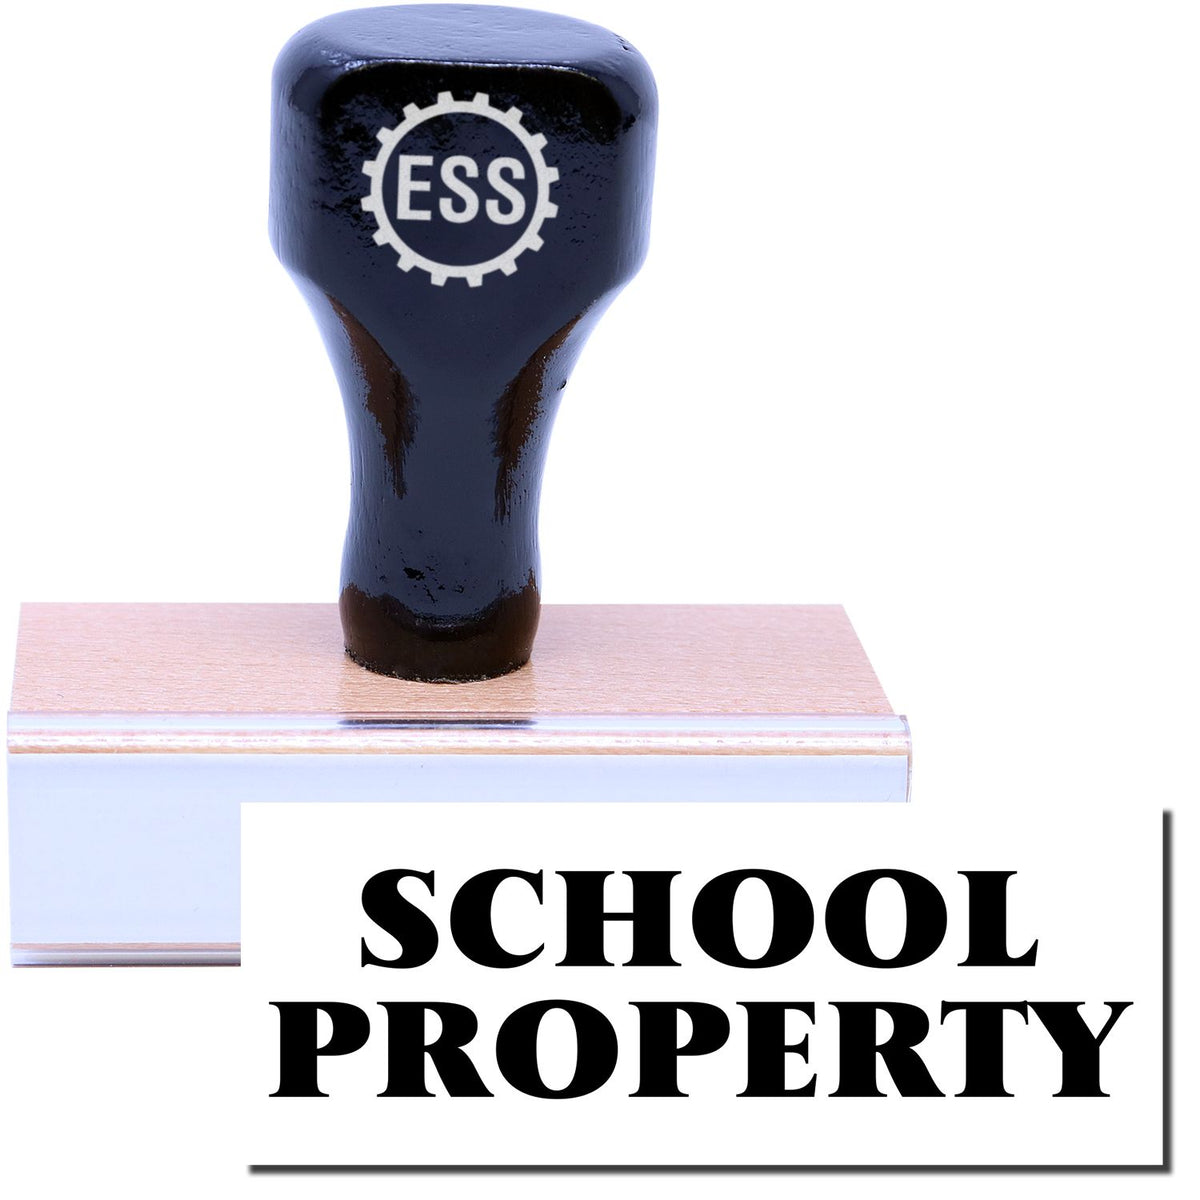 A stock office rubber stamp with a stamped image showing how the text &quot;SCHOOL PROPERTY&quot; in a large font is displayed after stamping.